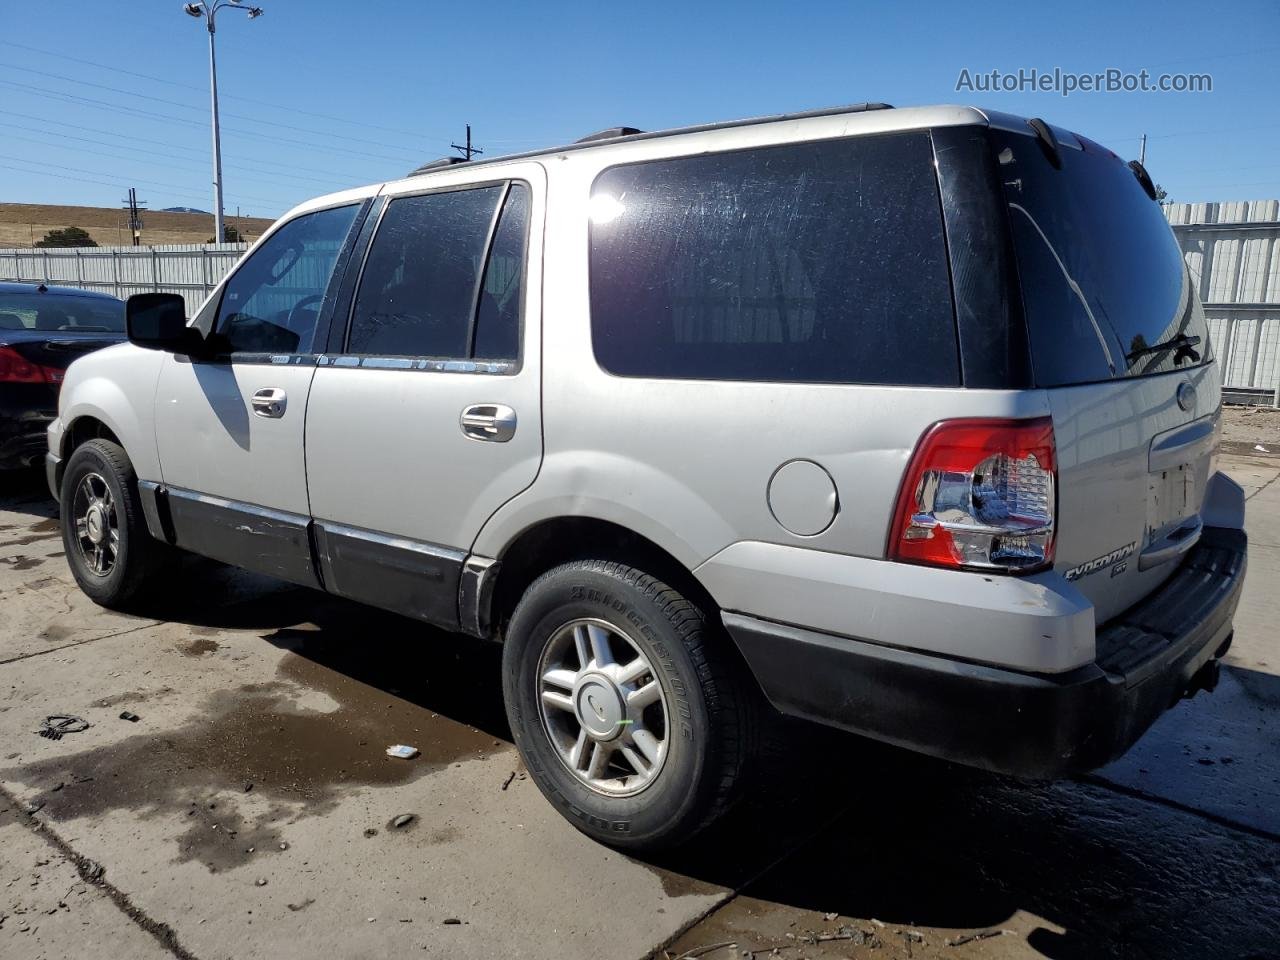 2003 Ford Expedition Xlt Silver vin: 1FMPU16L33LB79711